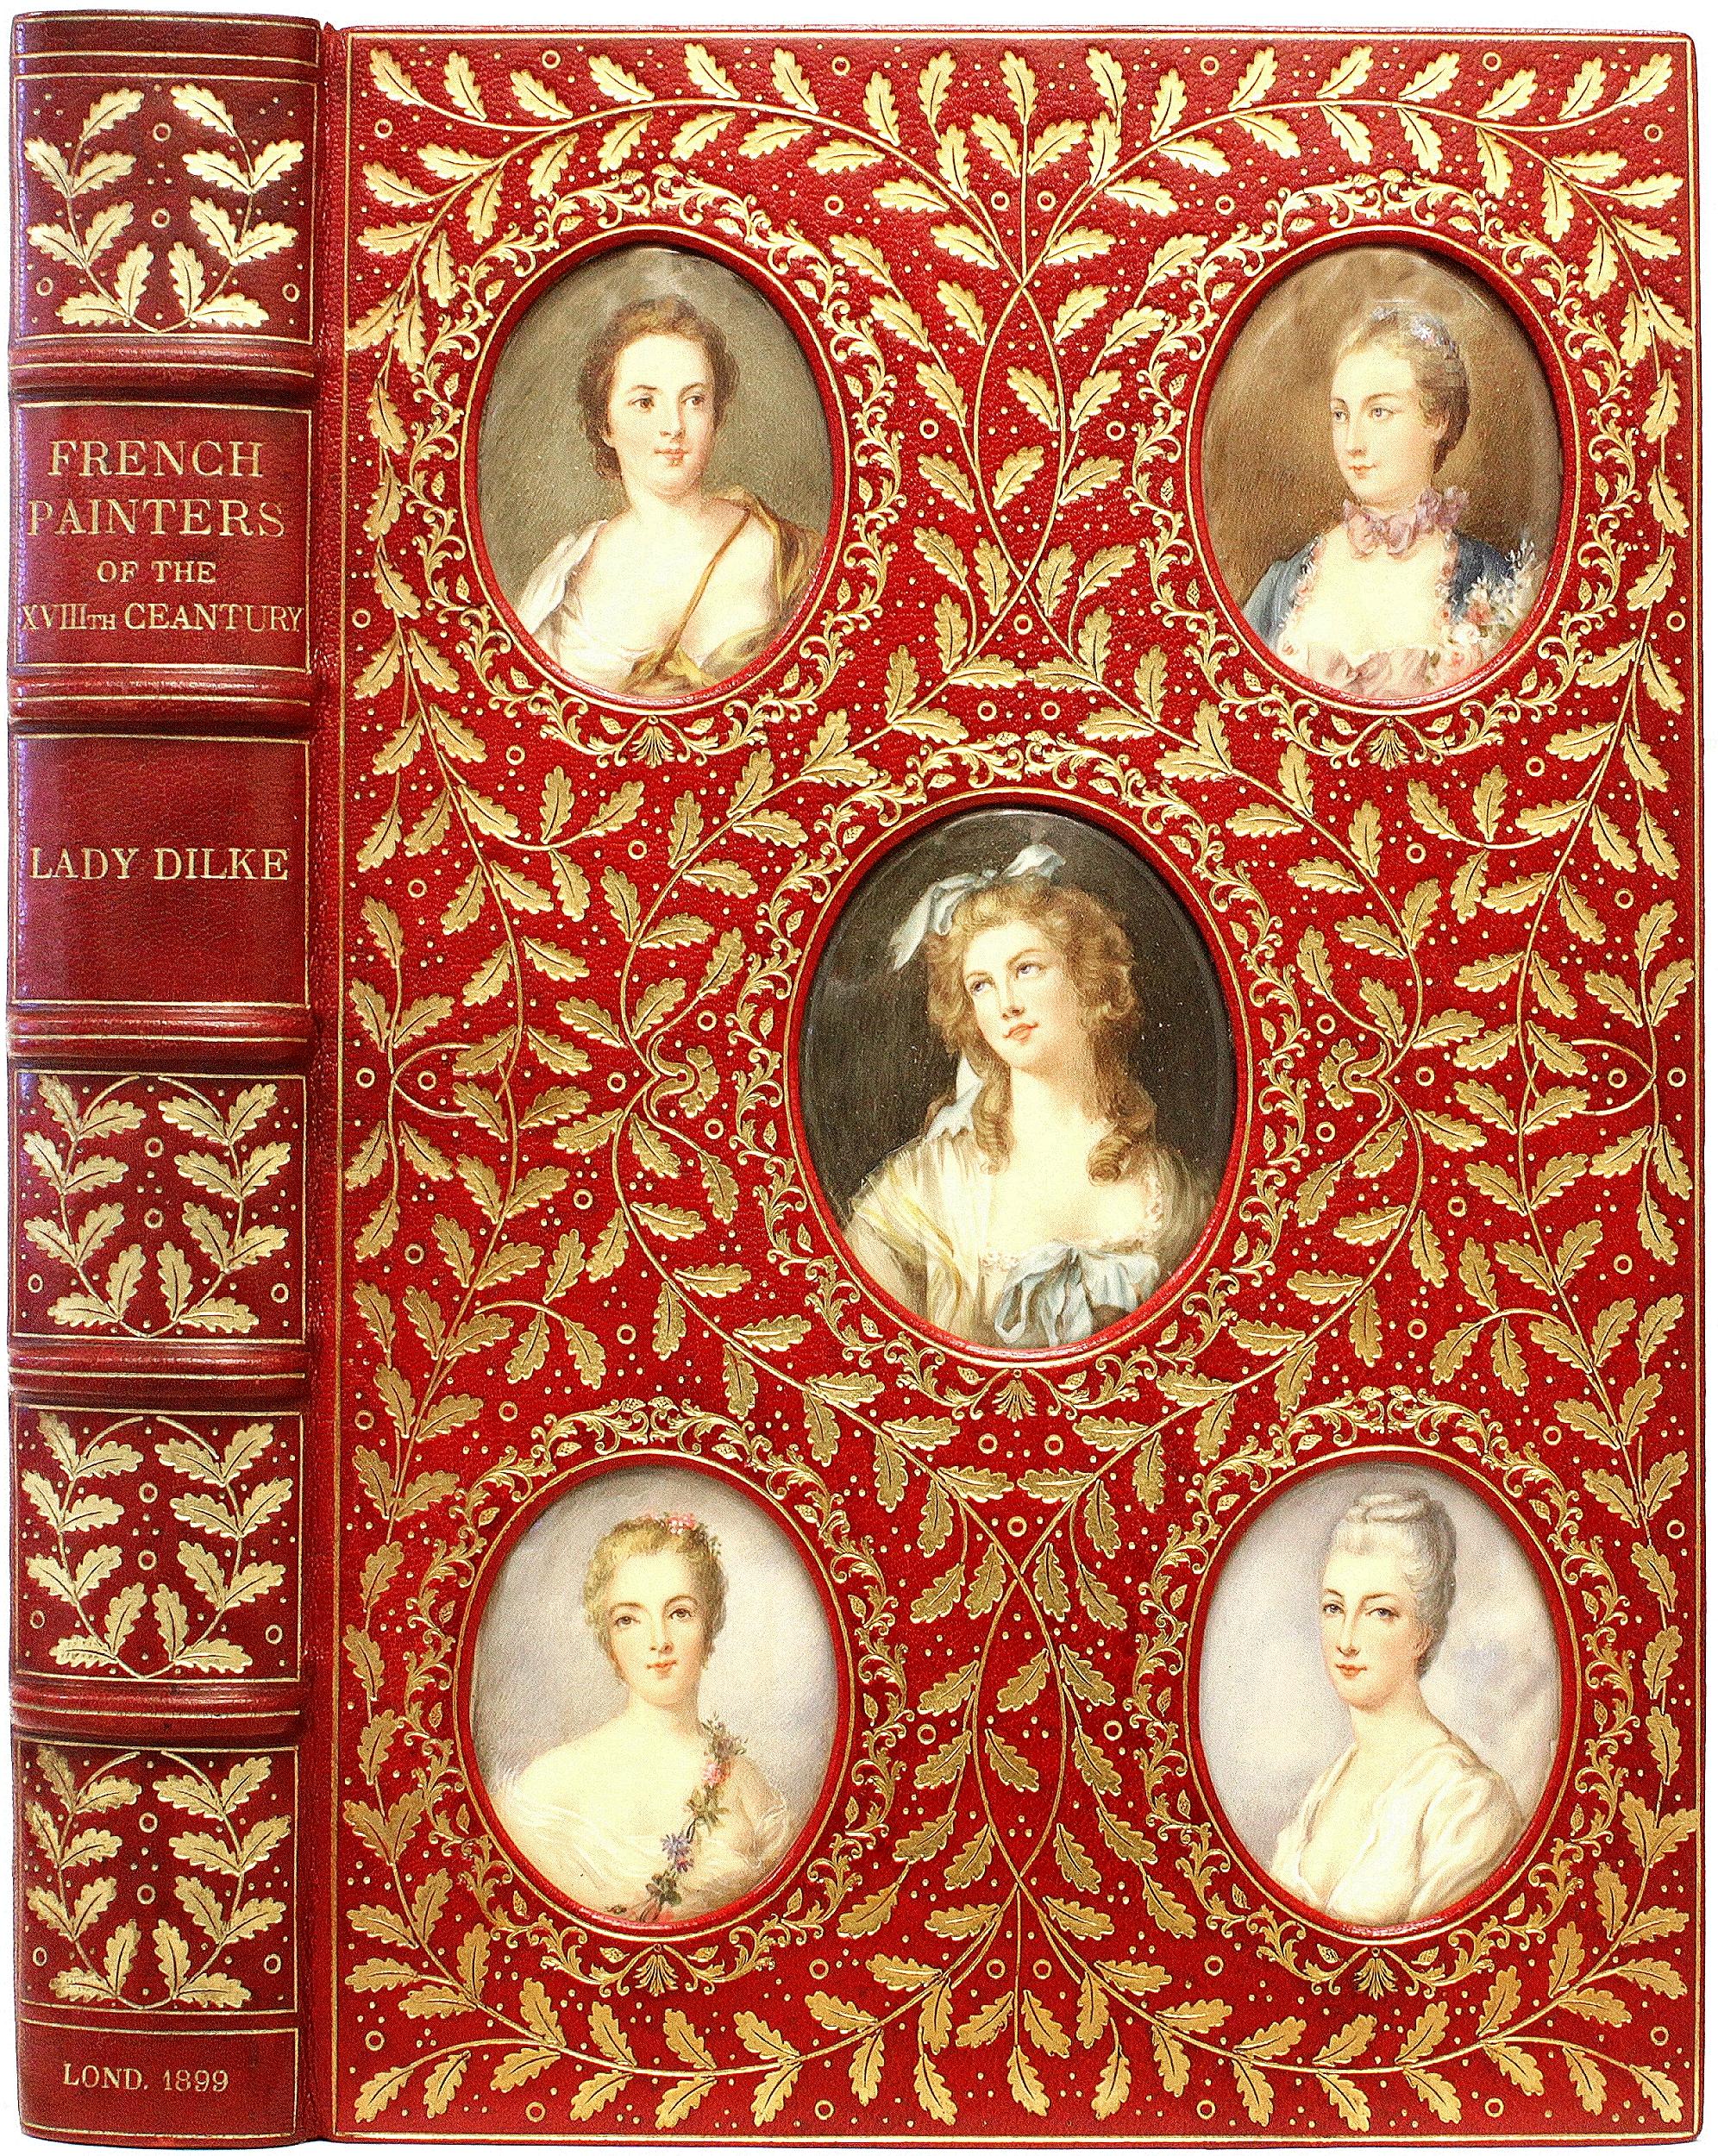 Author: Dilke, [Emilia Francis], Lady. 

Title: French Painters of the 18th century.

Publisher: London: George Bell, 1899.

Description: first edition. 1 vol., 11-3/8